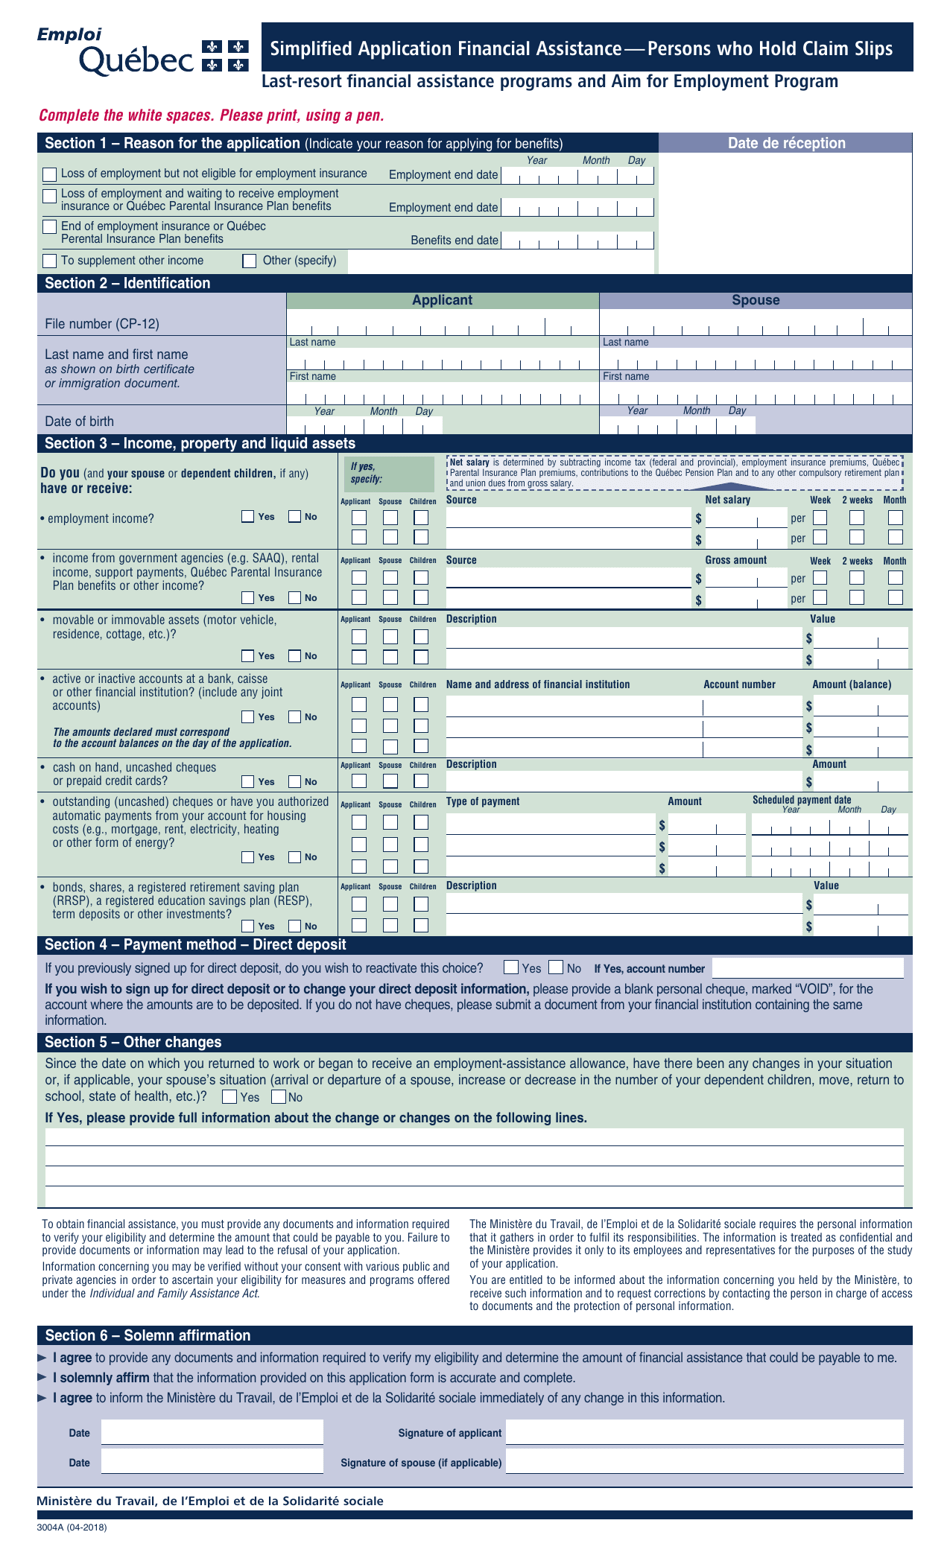 Form 3004A Simplified Application Financial Assistance - Persons Who Hold Claim Slips - Quebec, Canada, Page 1